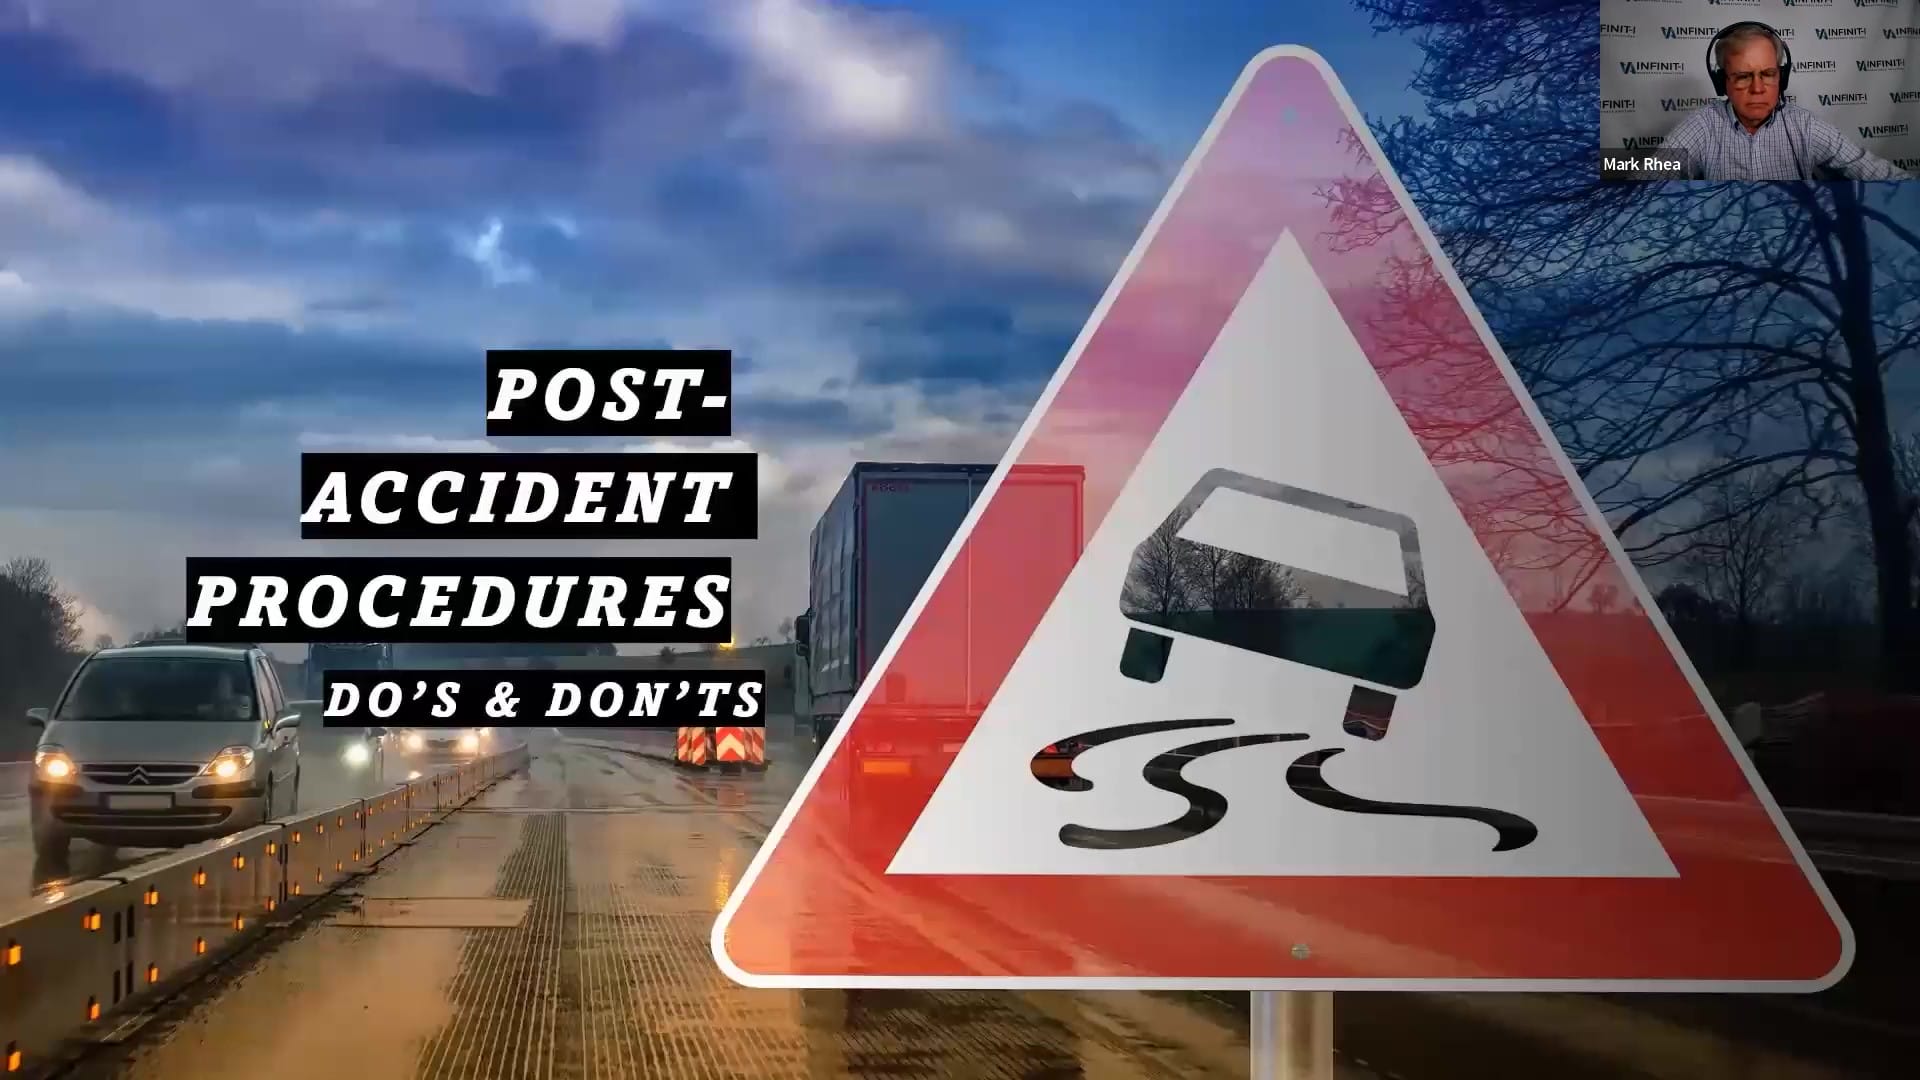 Post Accident Procedures Dos and Don'ts